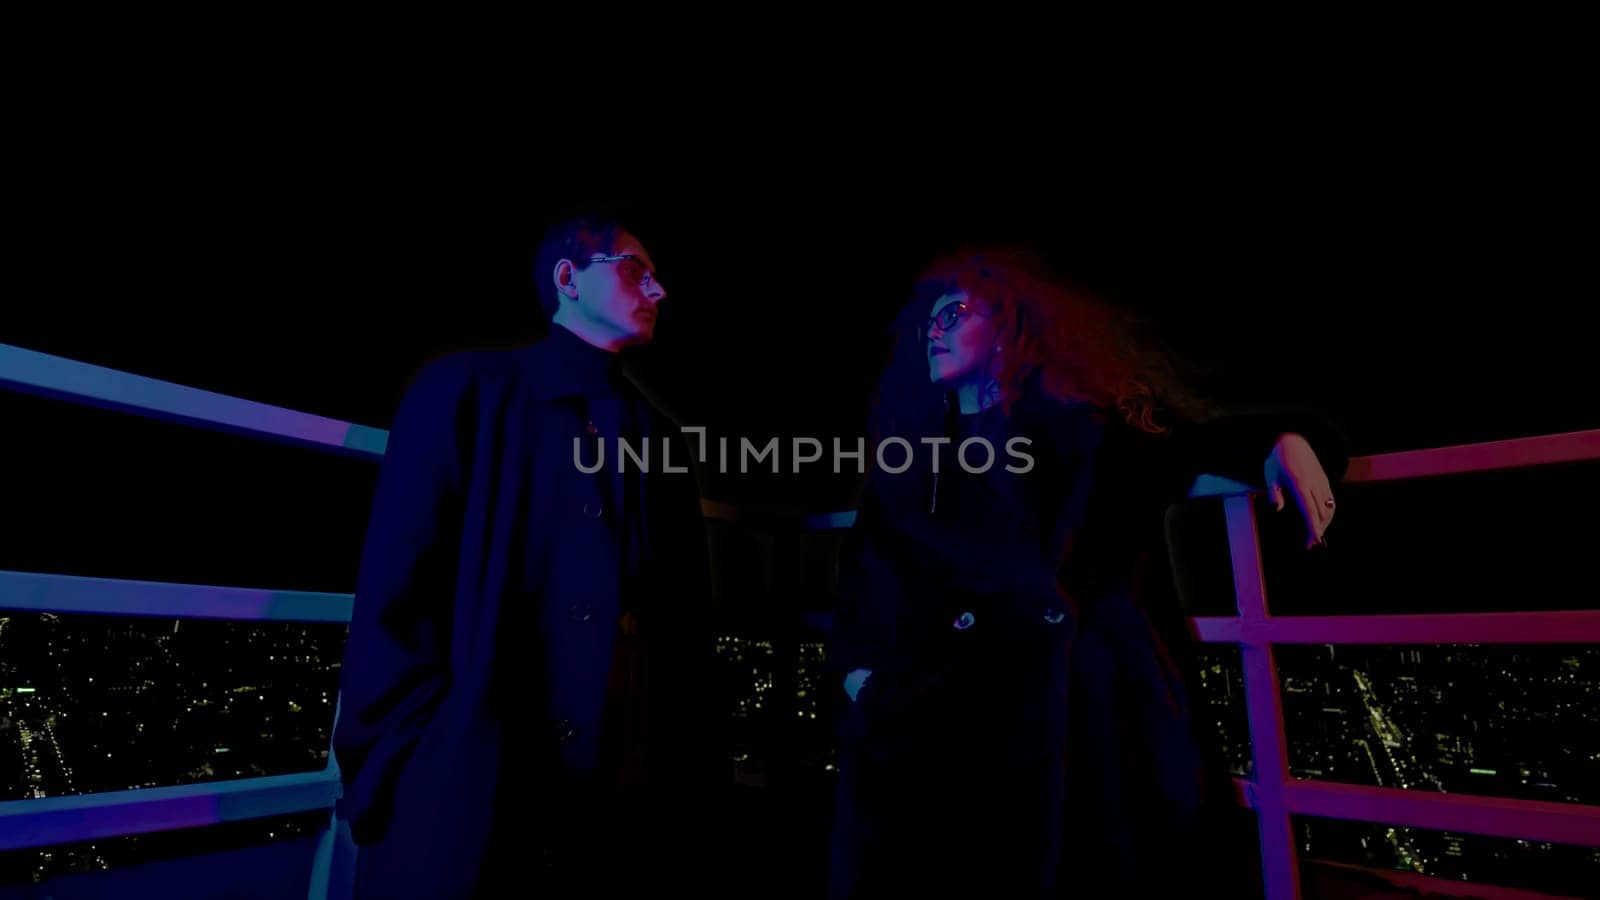 Man and woman on roof at night. Media. Couple of night heroes on roof of high-rise. Man and woman with glasses look like super villains by Mediawhalestock